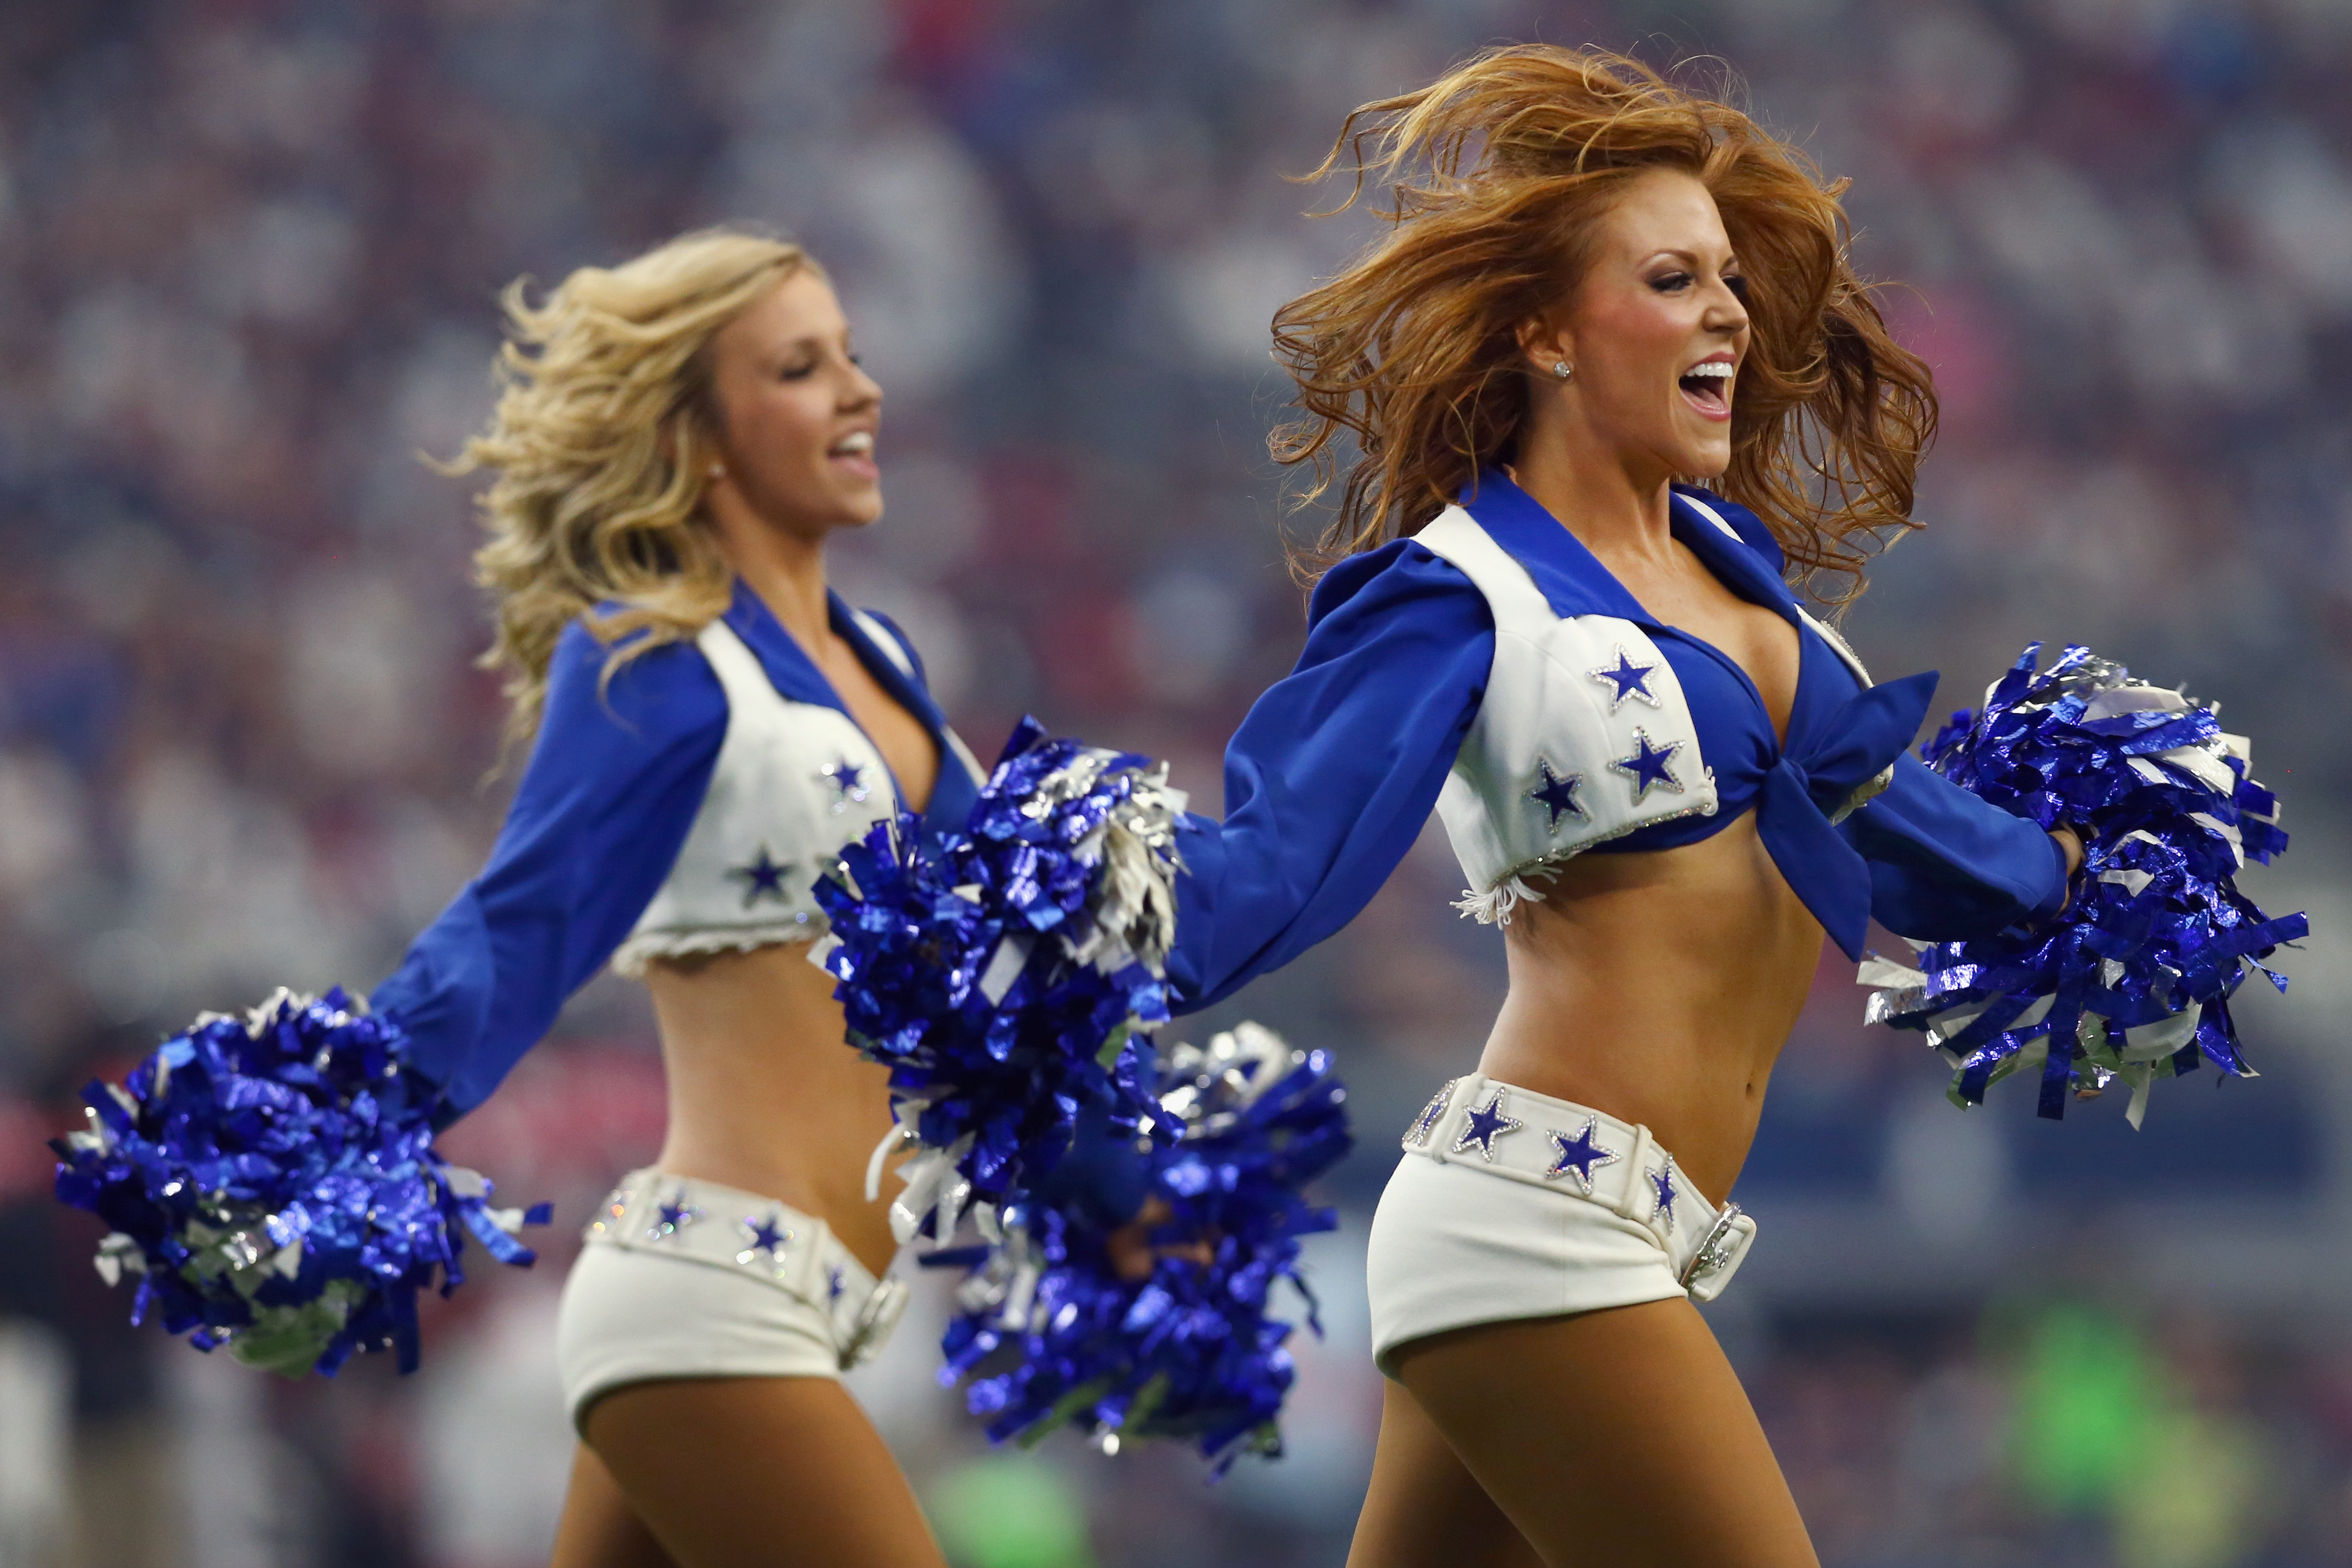 Dallas Cowboys Cheerleaders: How the Iconic Uniforms Came to Be